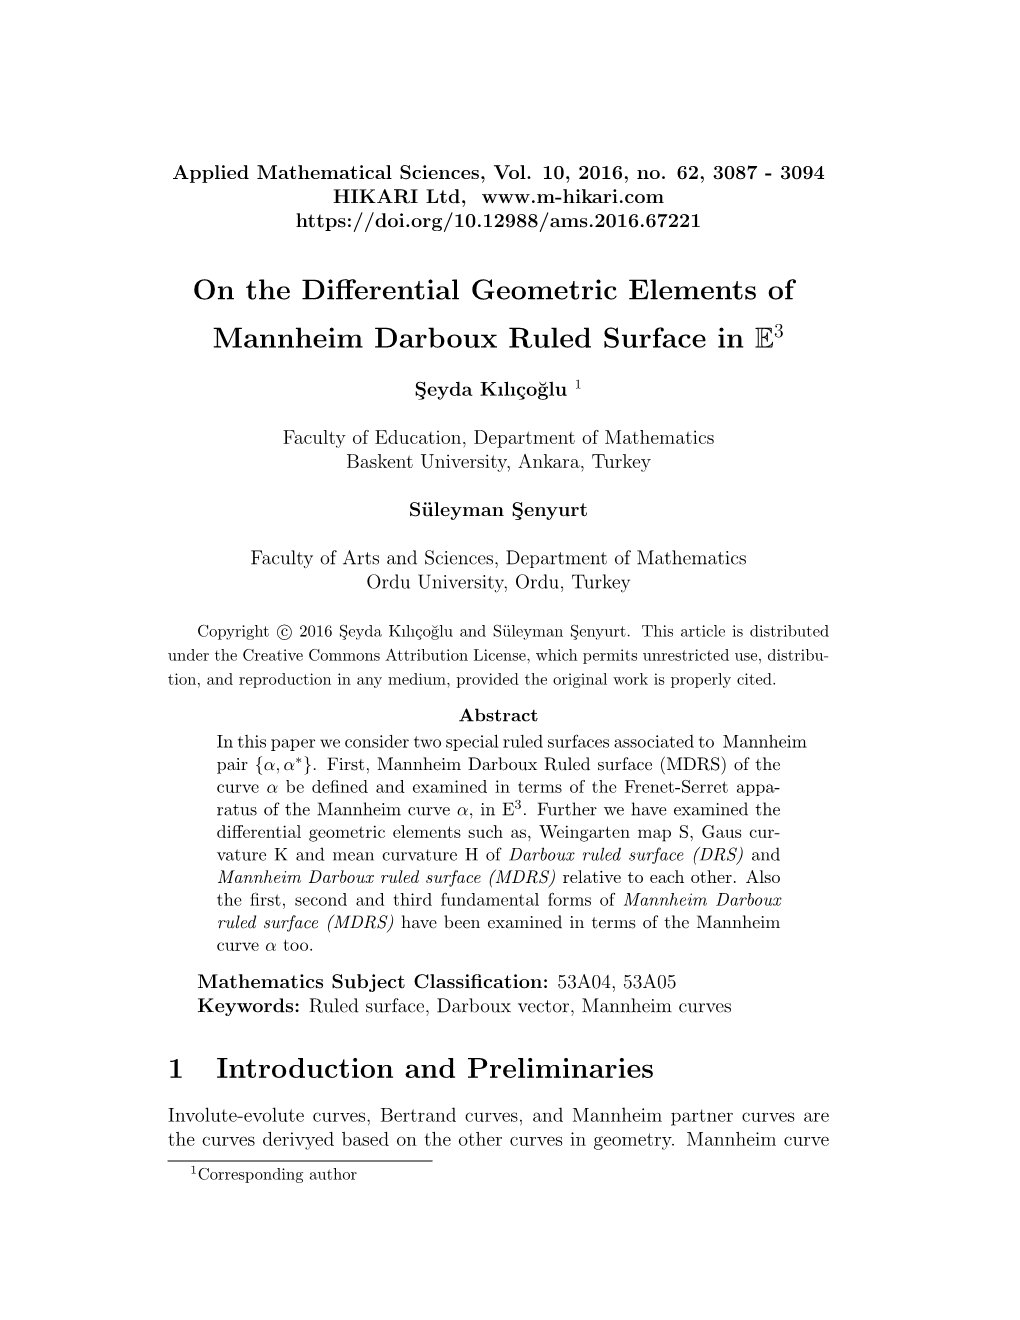 On the Differential Geometric Elements of Mannheim Darboux